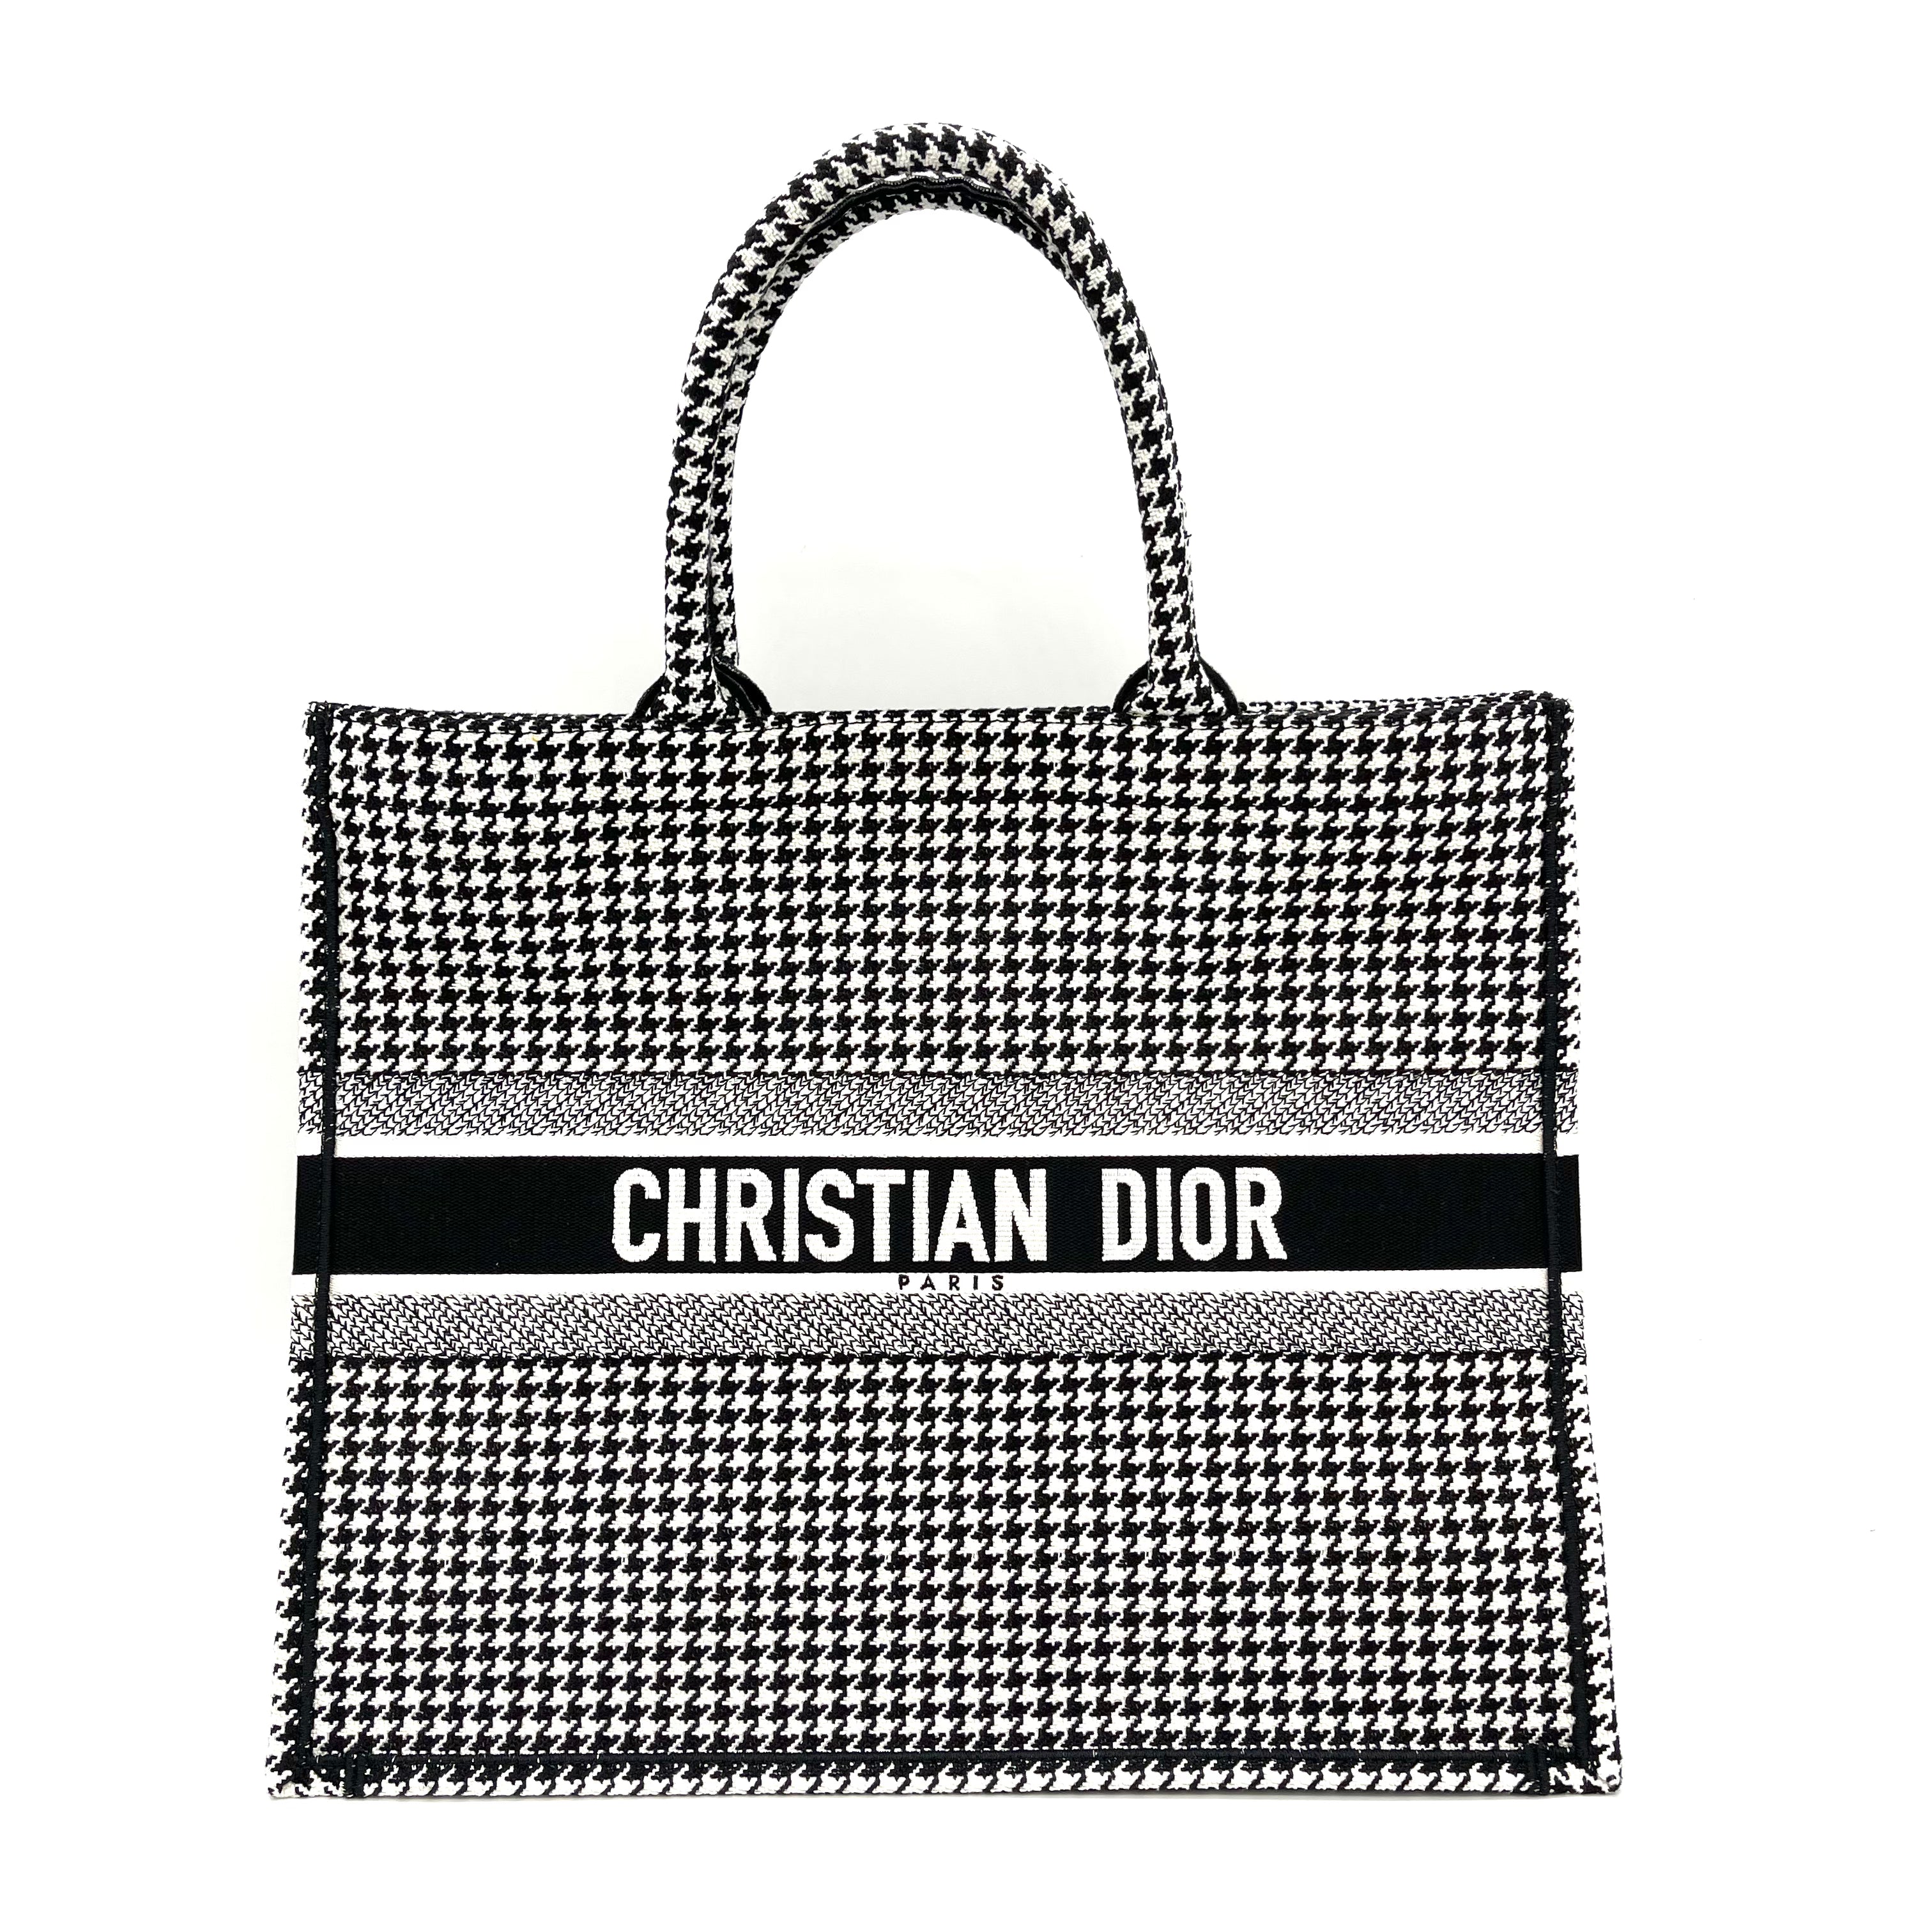 How to Authenticate a Dior Book Tote